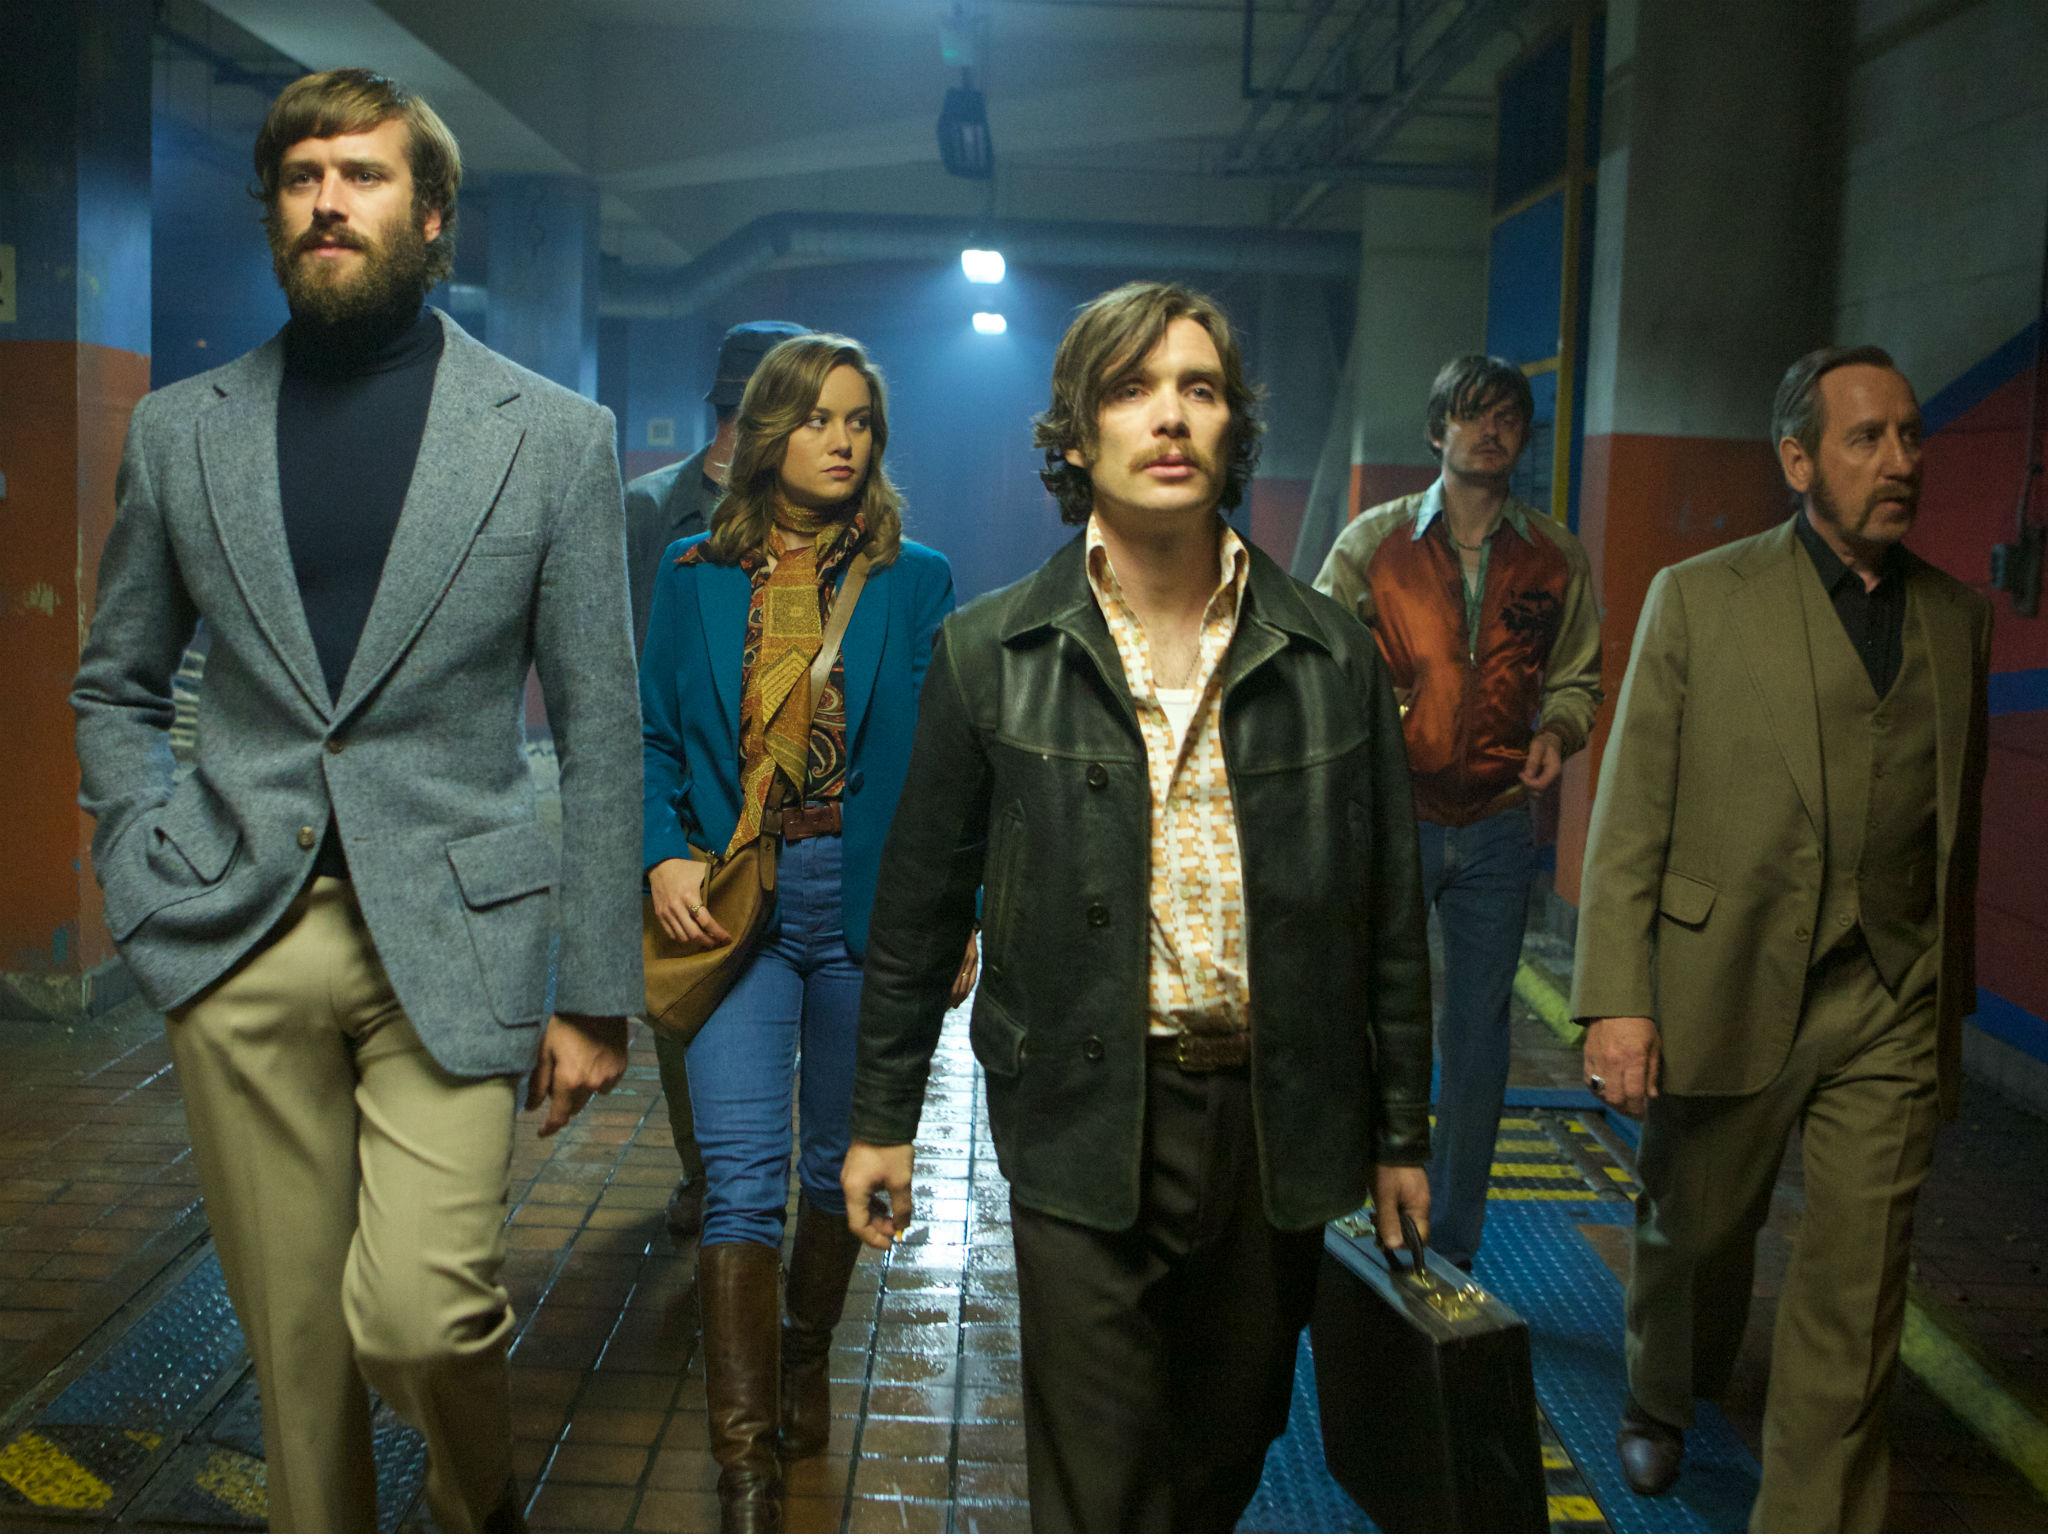 Armie Hammer as Ord, Brie Larson as Justine, Cillian Murphy as Chris, Sam Riley as Stevo and Michael Smiley as Frank in Ben Wheatley's 'Free Fire'